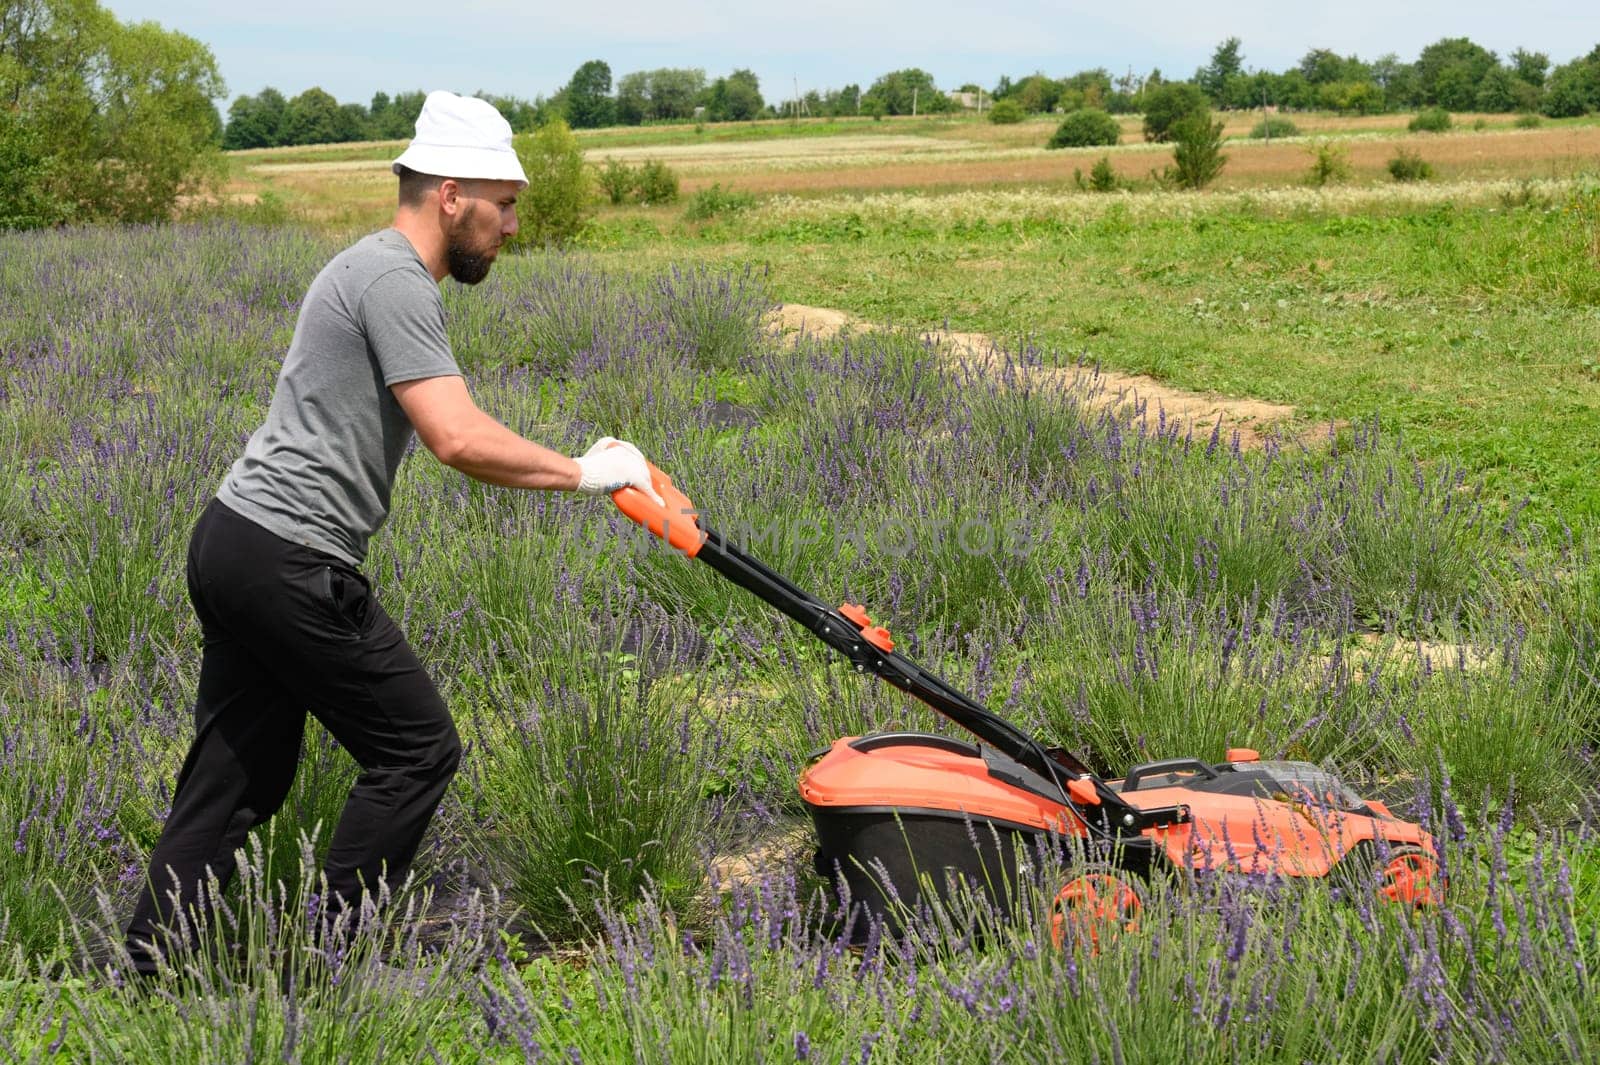 Caring for a lavender field, a man mows the grass with an electric lawnmower. Lithium Ion battery powered Electric Lawn mower by Niko_Cingaryuk